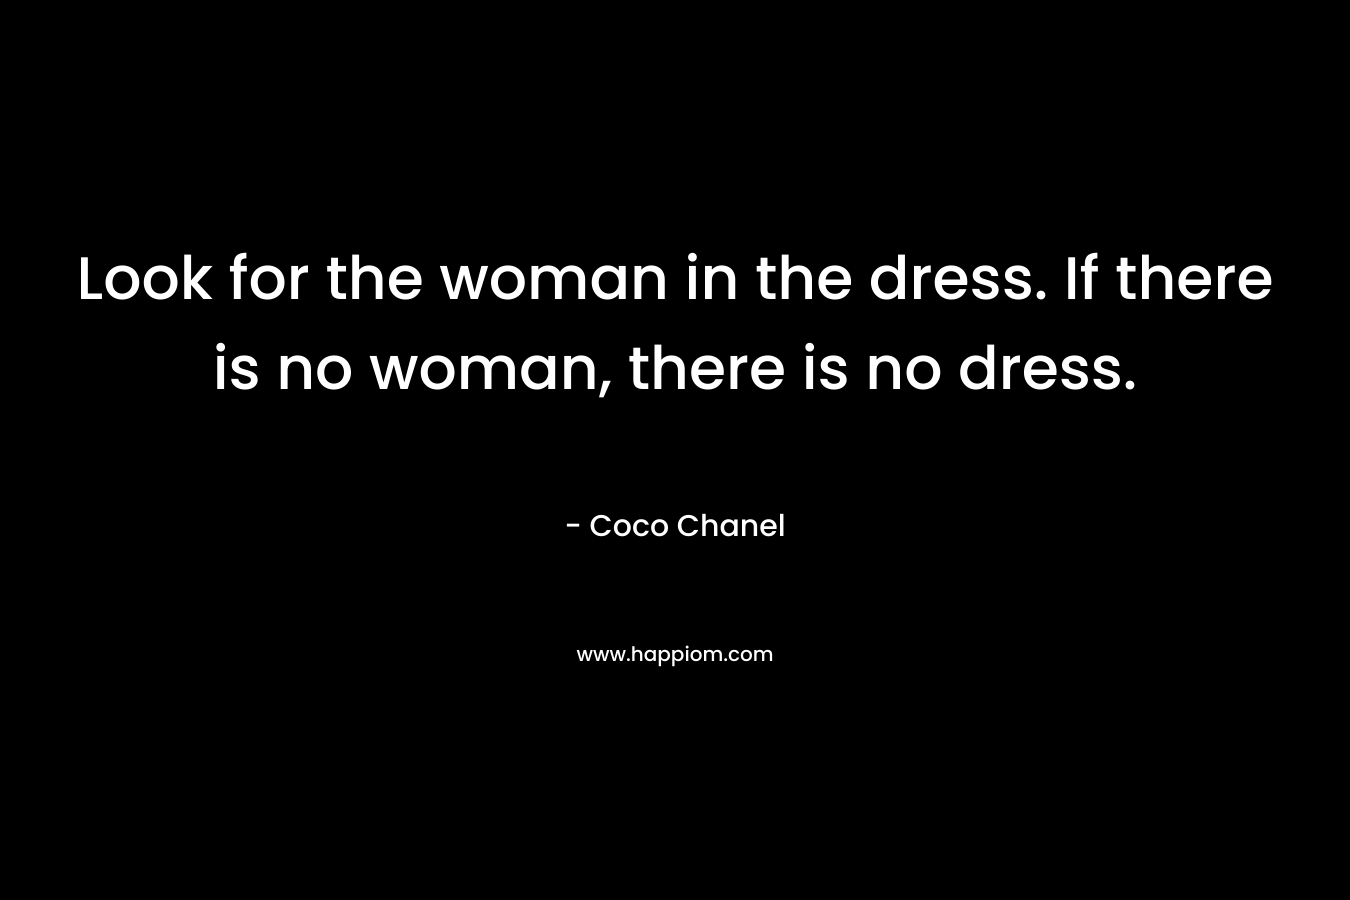 Look for the woman in the dress. If there is no woman, there is no dress.